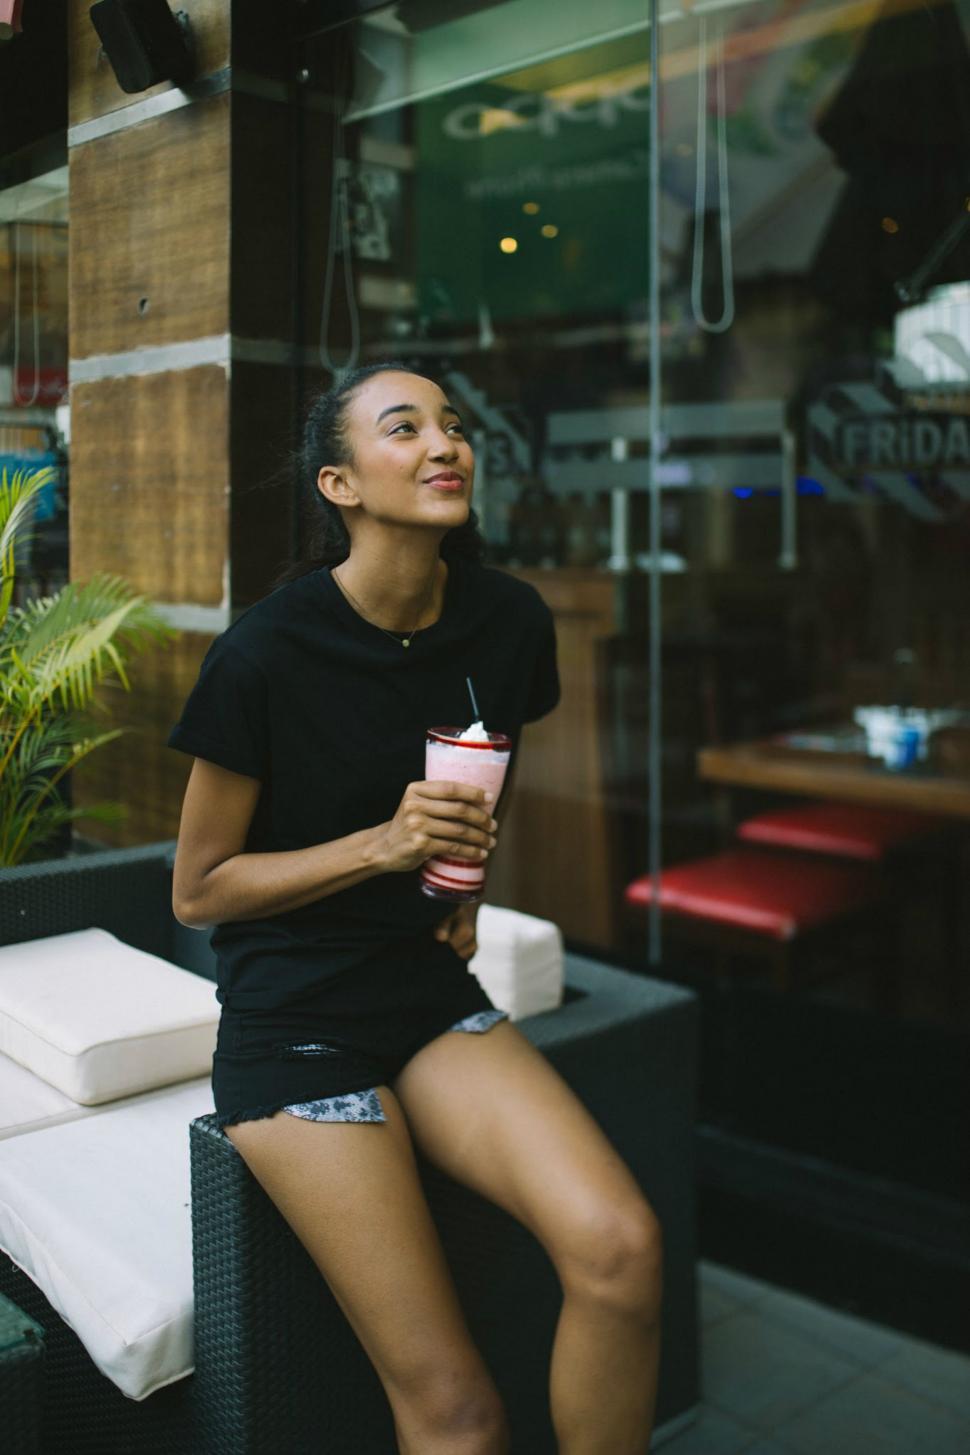 Free Image of Woman Sitting on Bench With Drink 